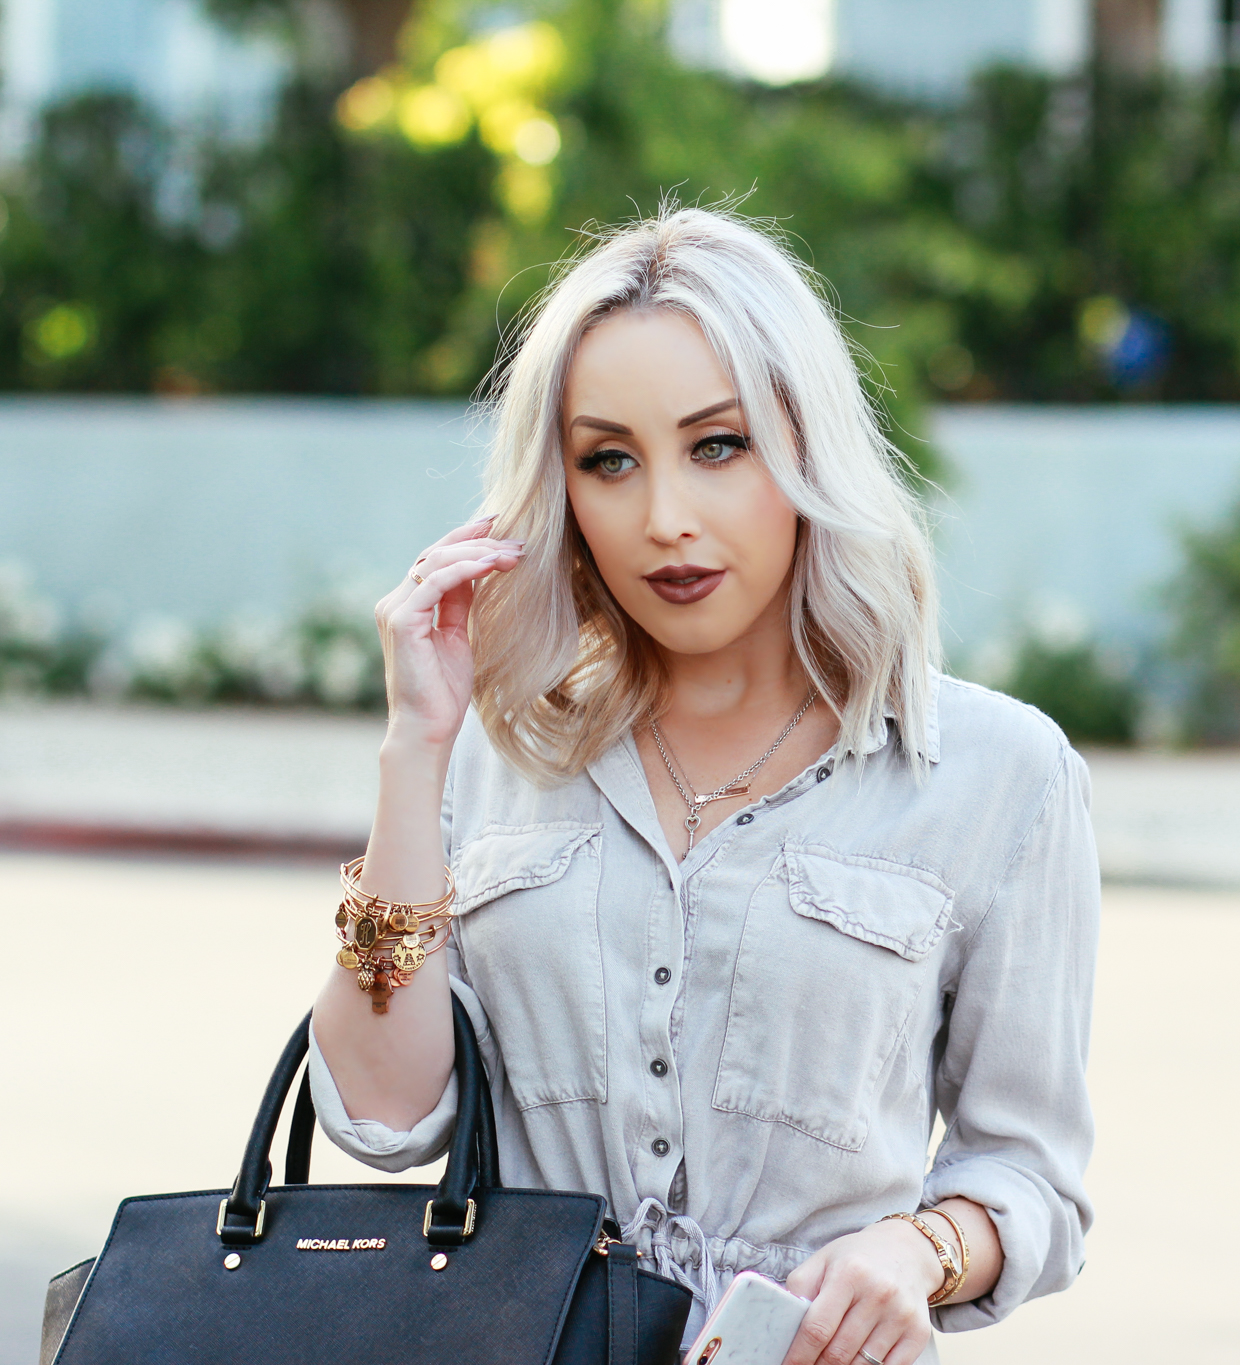 Blondie in the City | Button Up Cargo Dress, Michael Kors Bag, Ankle Strap Heels